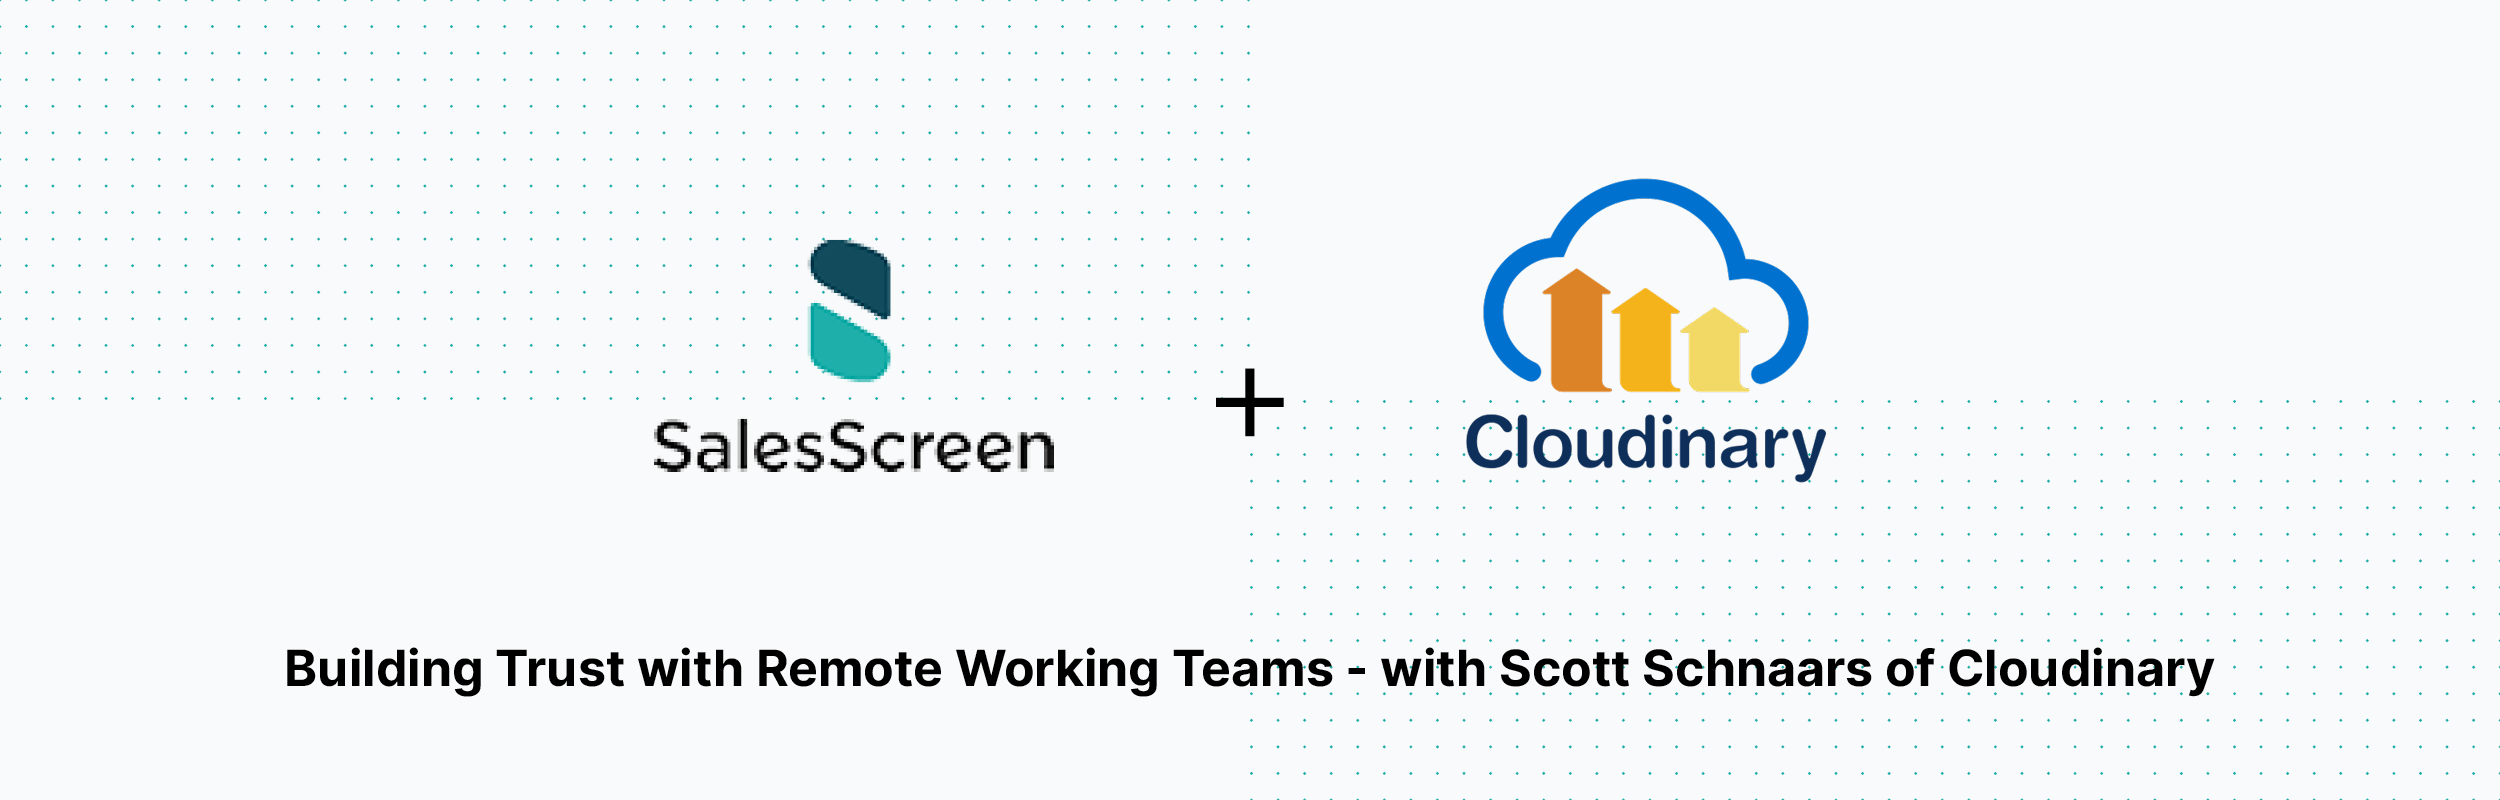 Building Trust with Remote Working Teams - with Scott Schnaars of Cloudinary